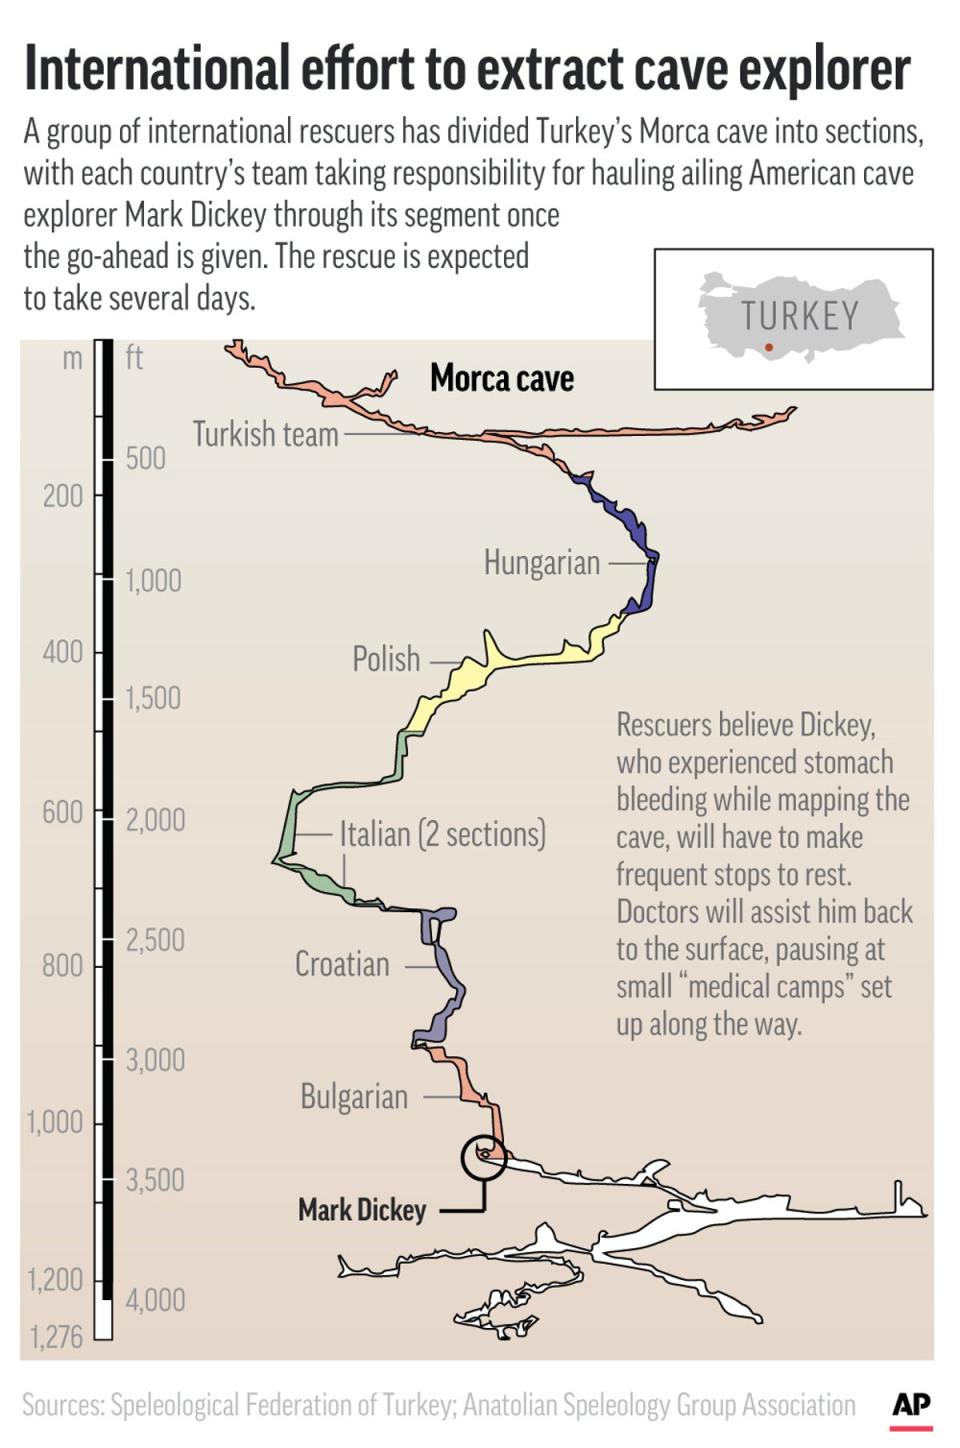 Cave rescue teams from several European countries conducted a extraction effort to rescue Dickey (AP Graphic)